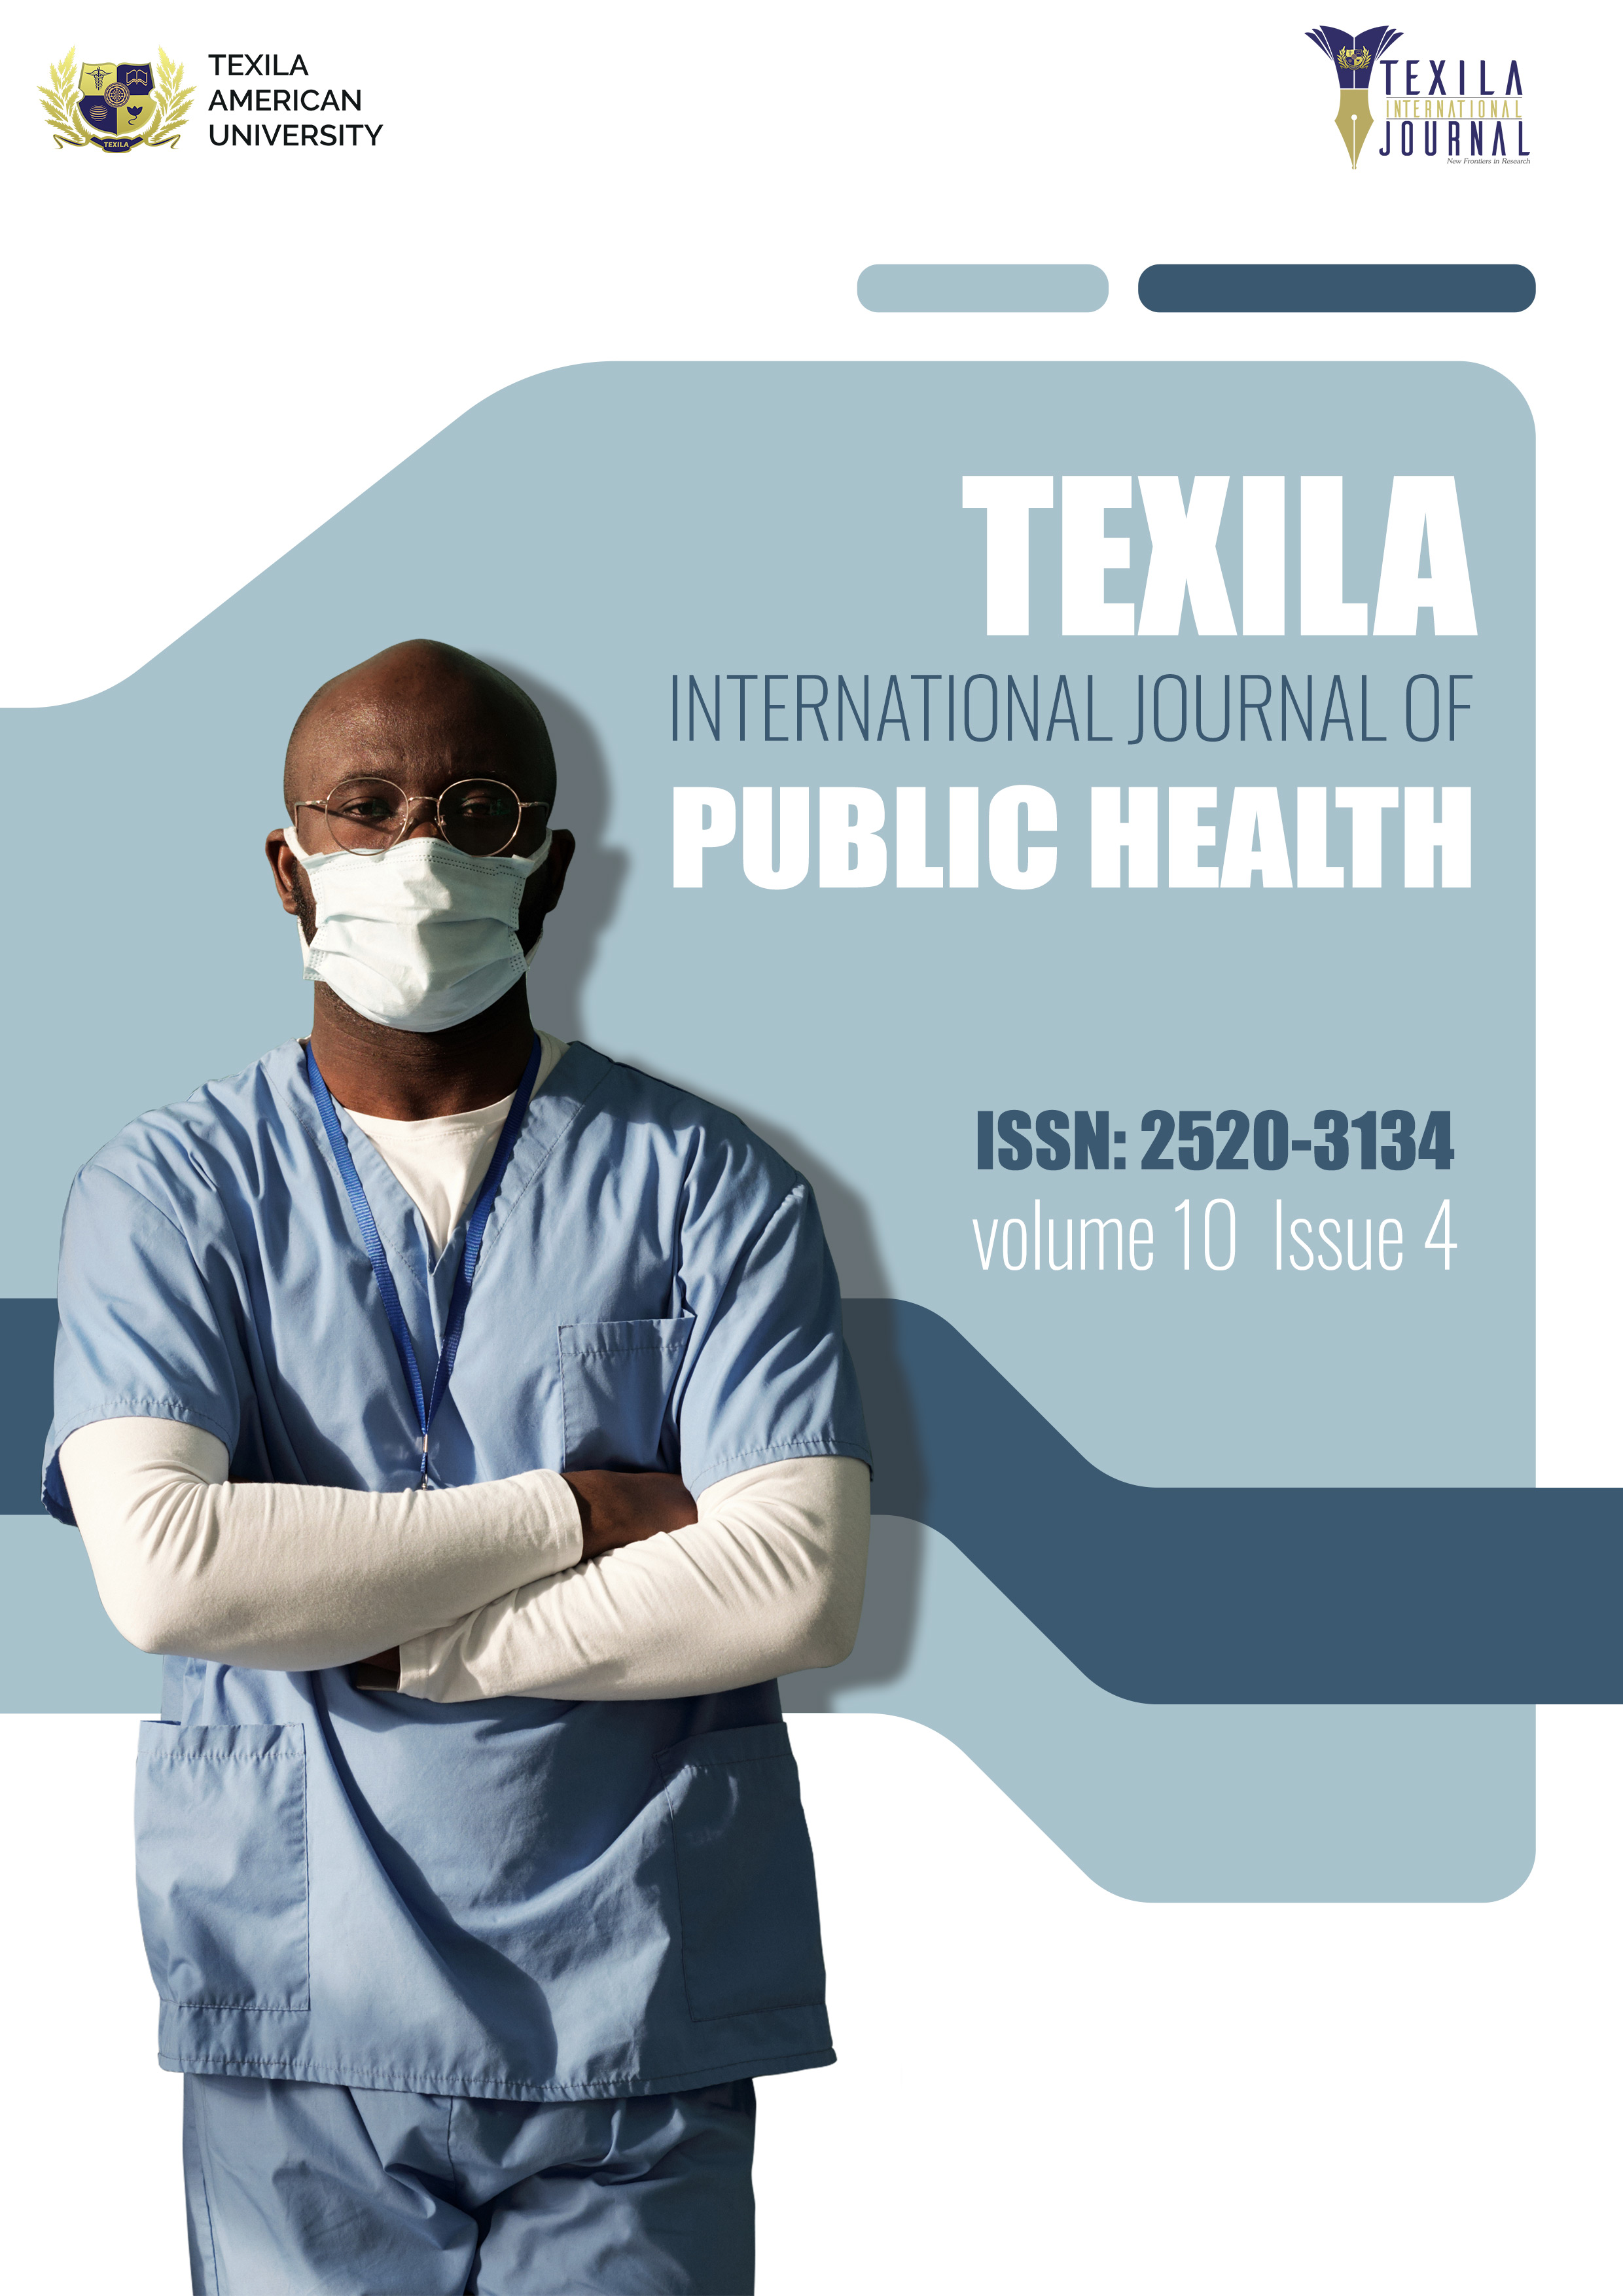 Current Issue Volume 10 | Issue 4 | TEXILA INTERNATIONAL JOURNAL OF PUBLIC  HEALTH | Texila Journal